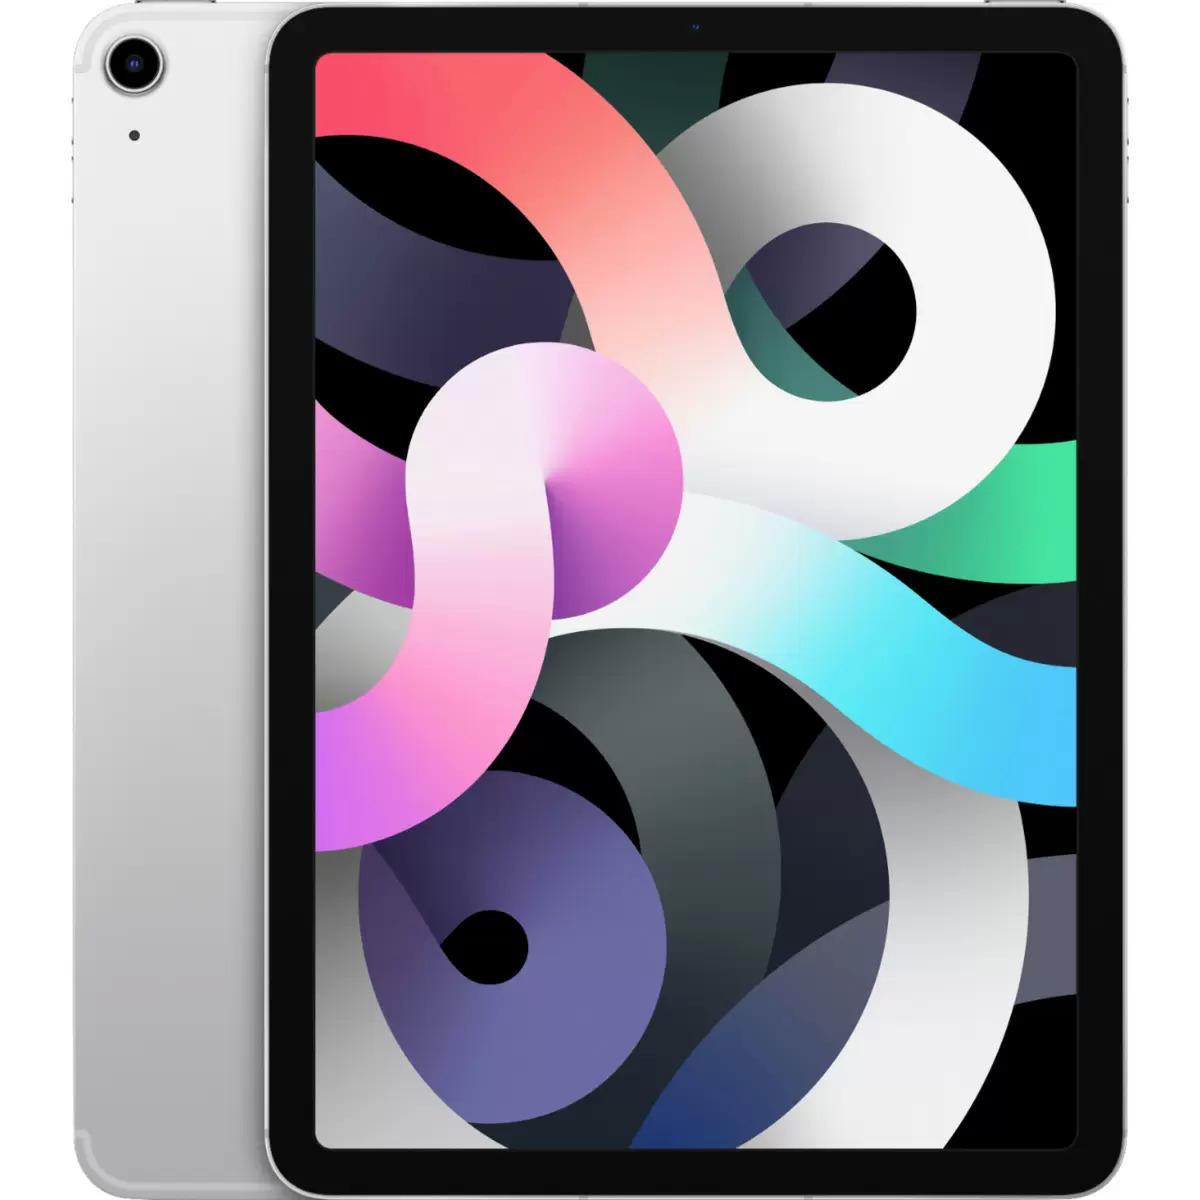 Apple iPad Air 10.9in 256GB Wifi Tablet for $549 Shipped